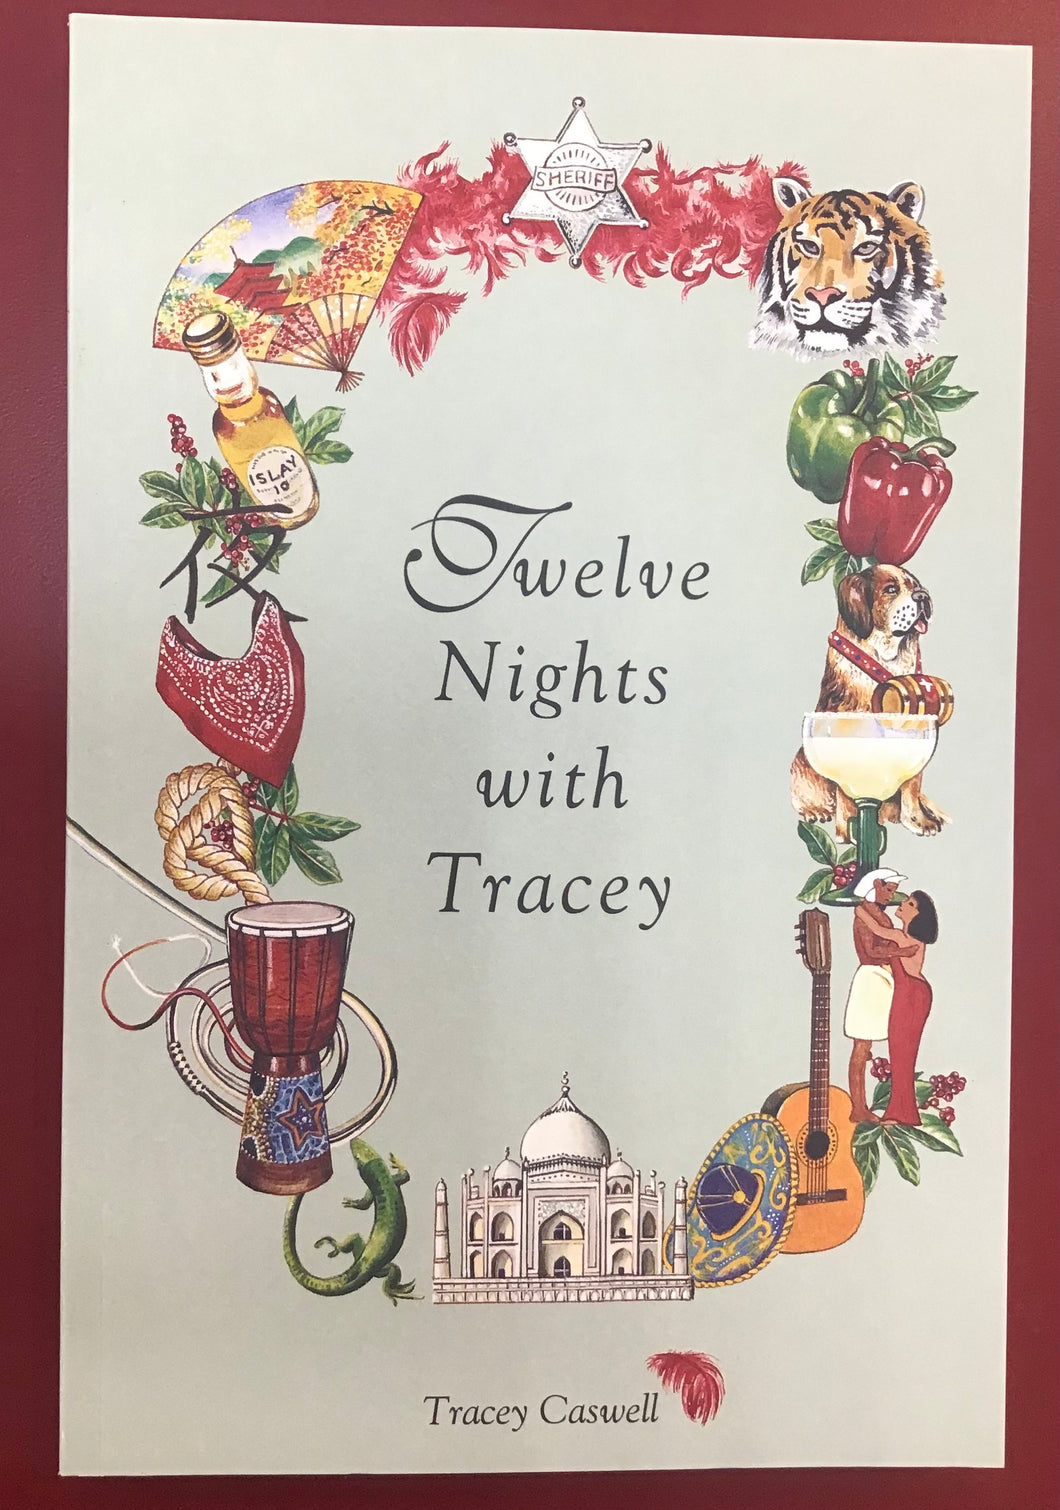 Twelve Nights with Tracey by Tracey Caswell